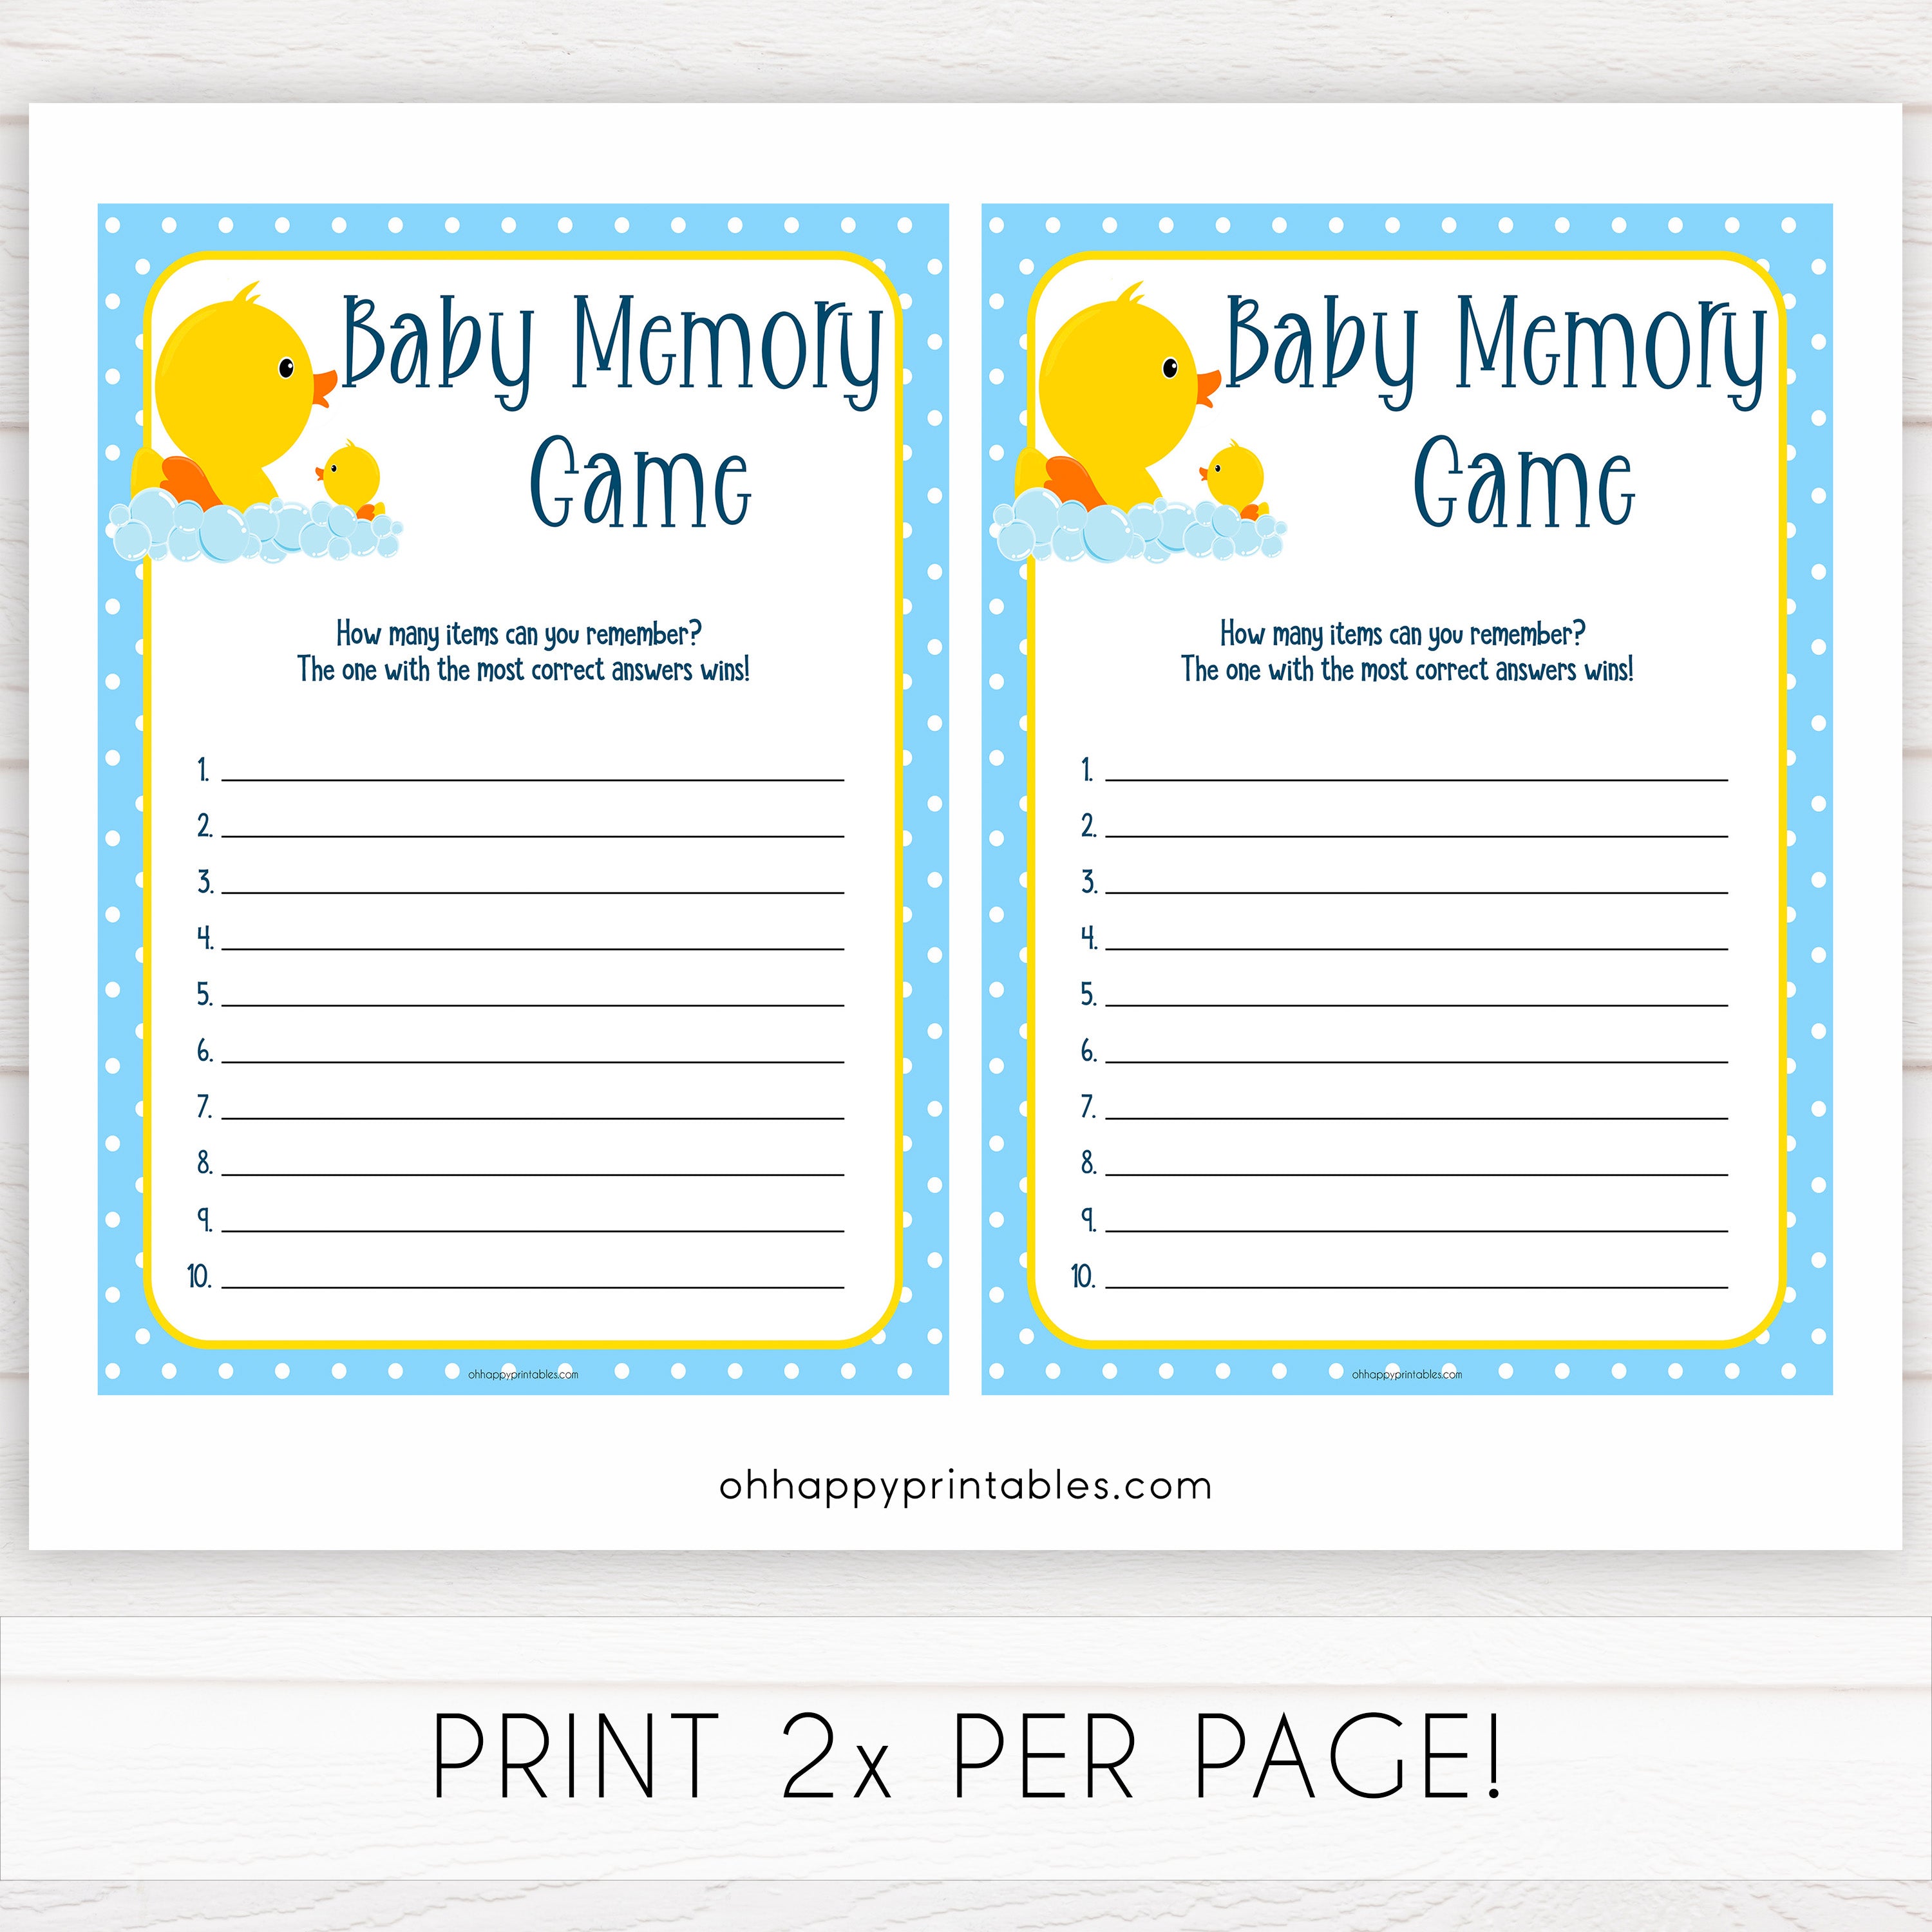 rubber ducky baby games, baby memory baby game, printable baby games, baby shower games, rubber ducky baby theme, fun baby games, popular baby games